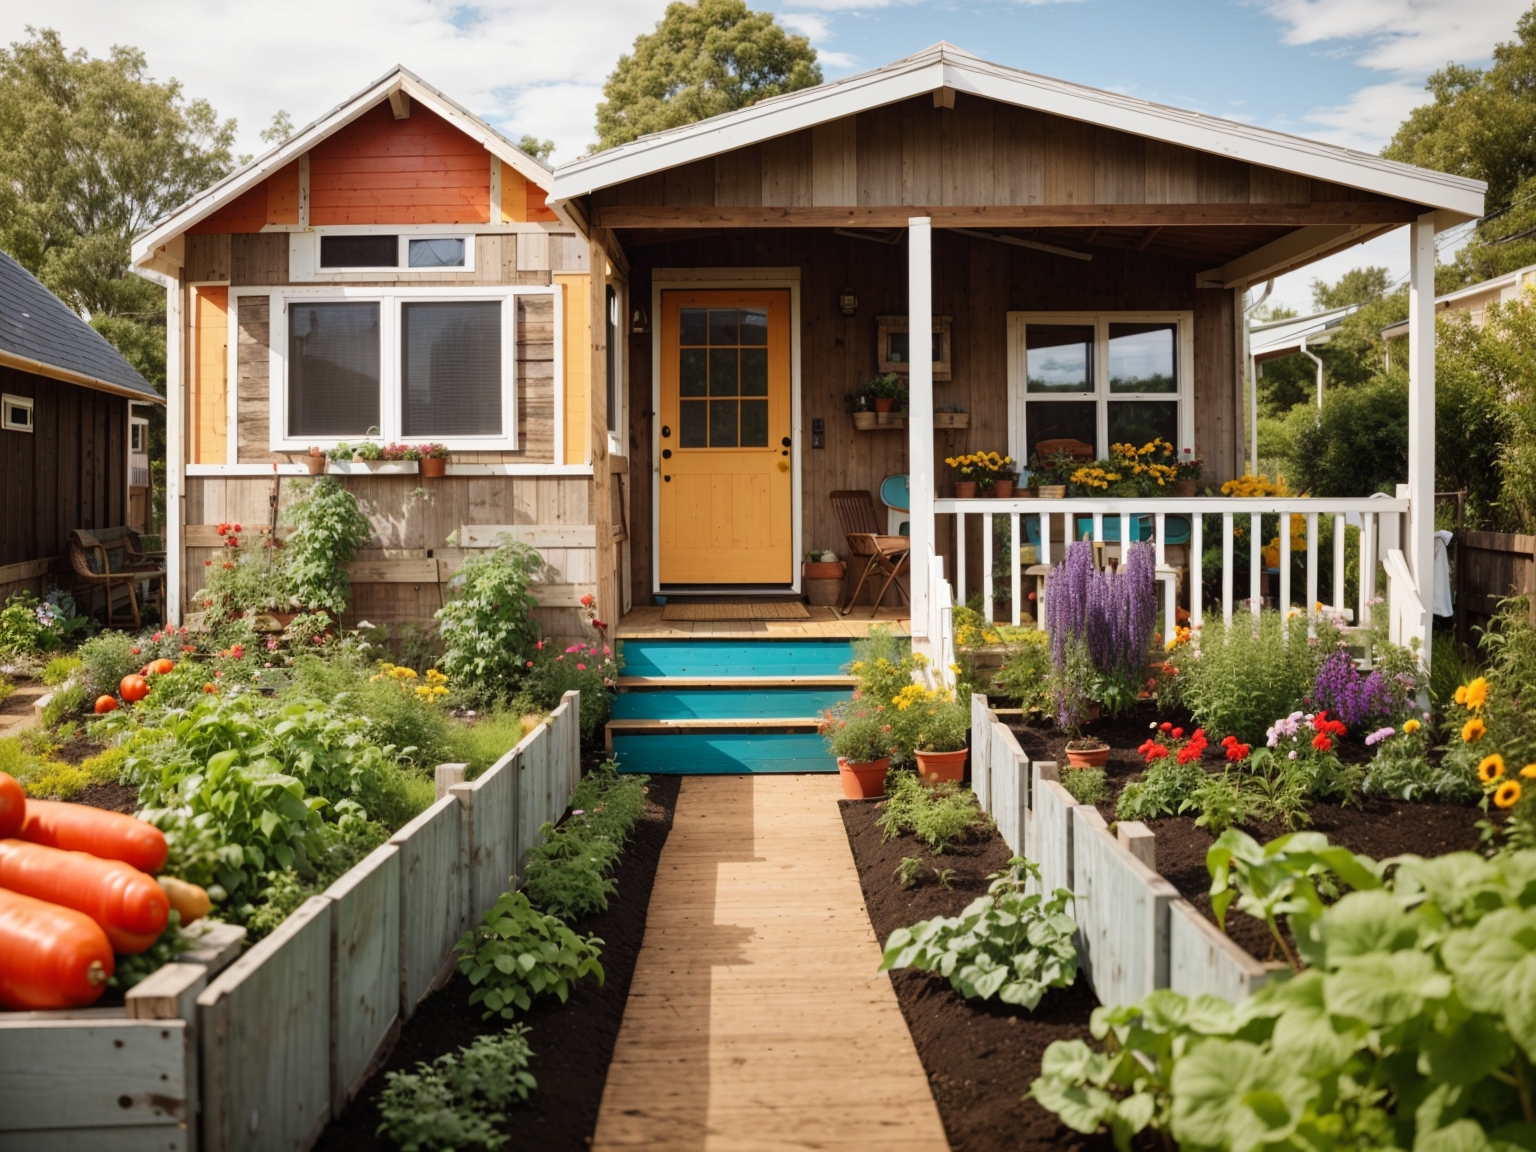 Rustic mobile home in backyard with wrap around garden